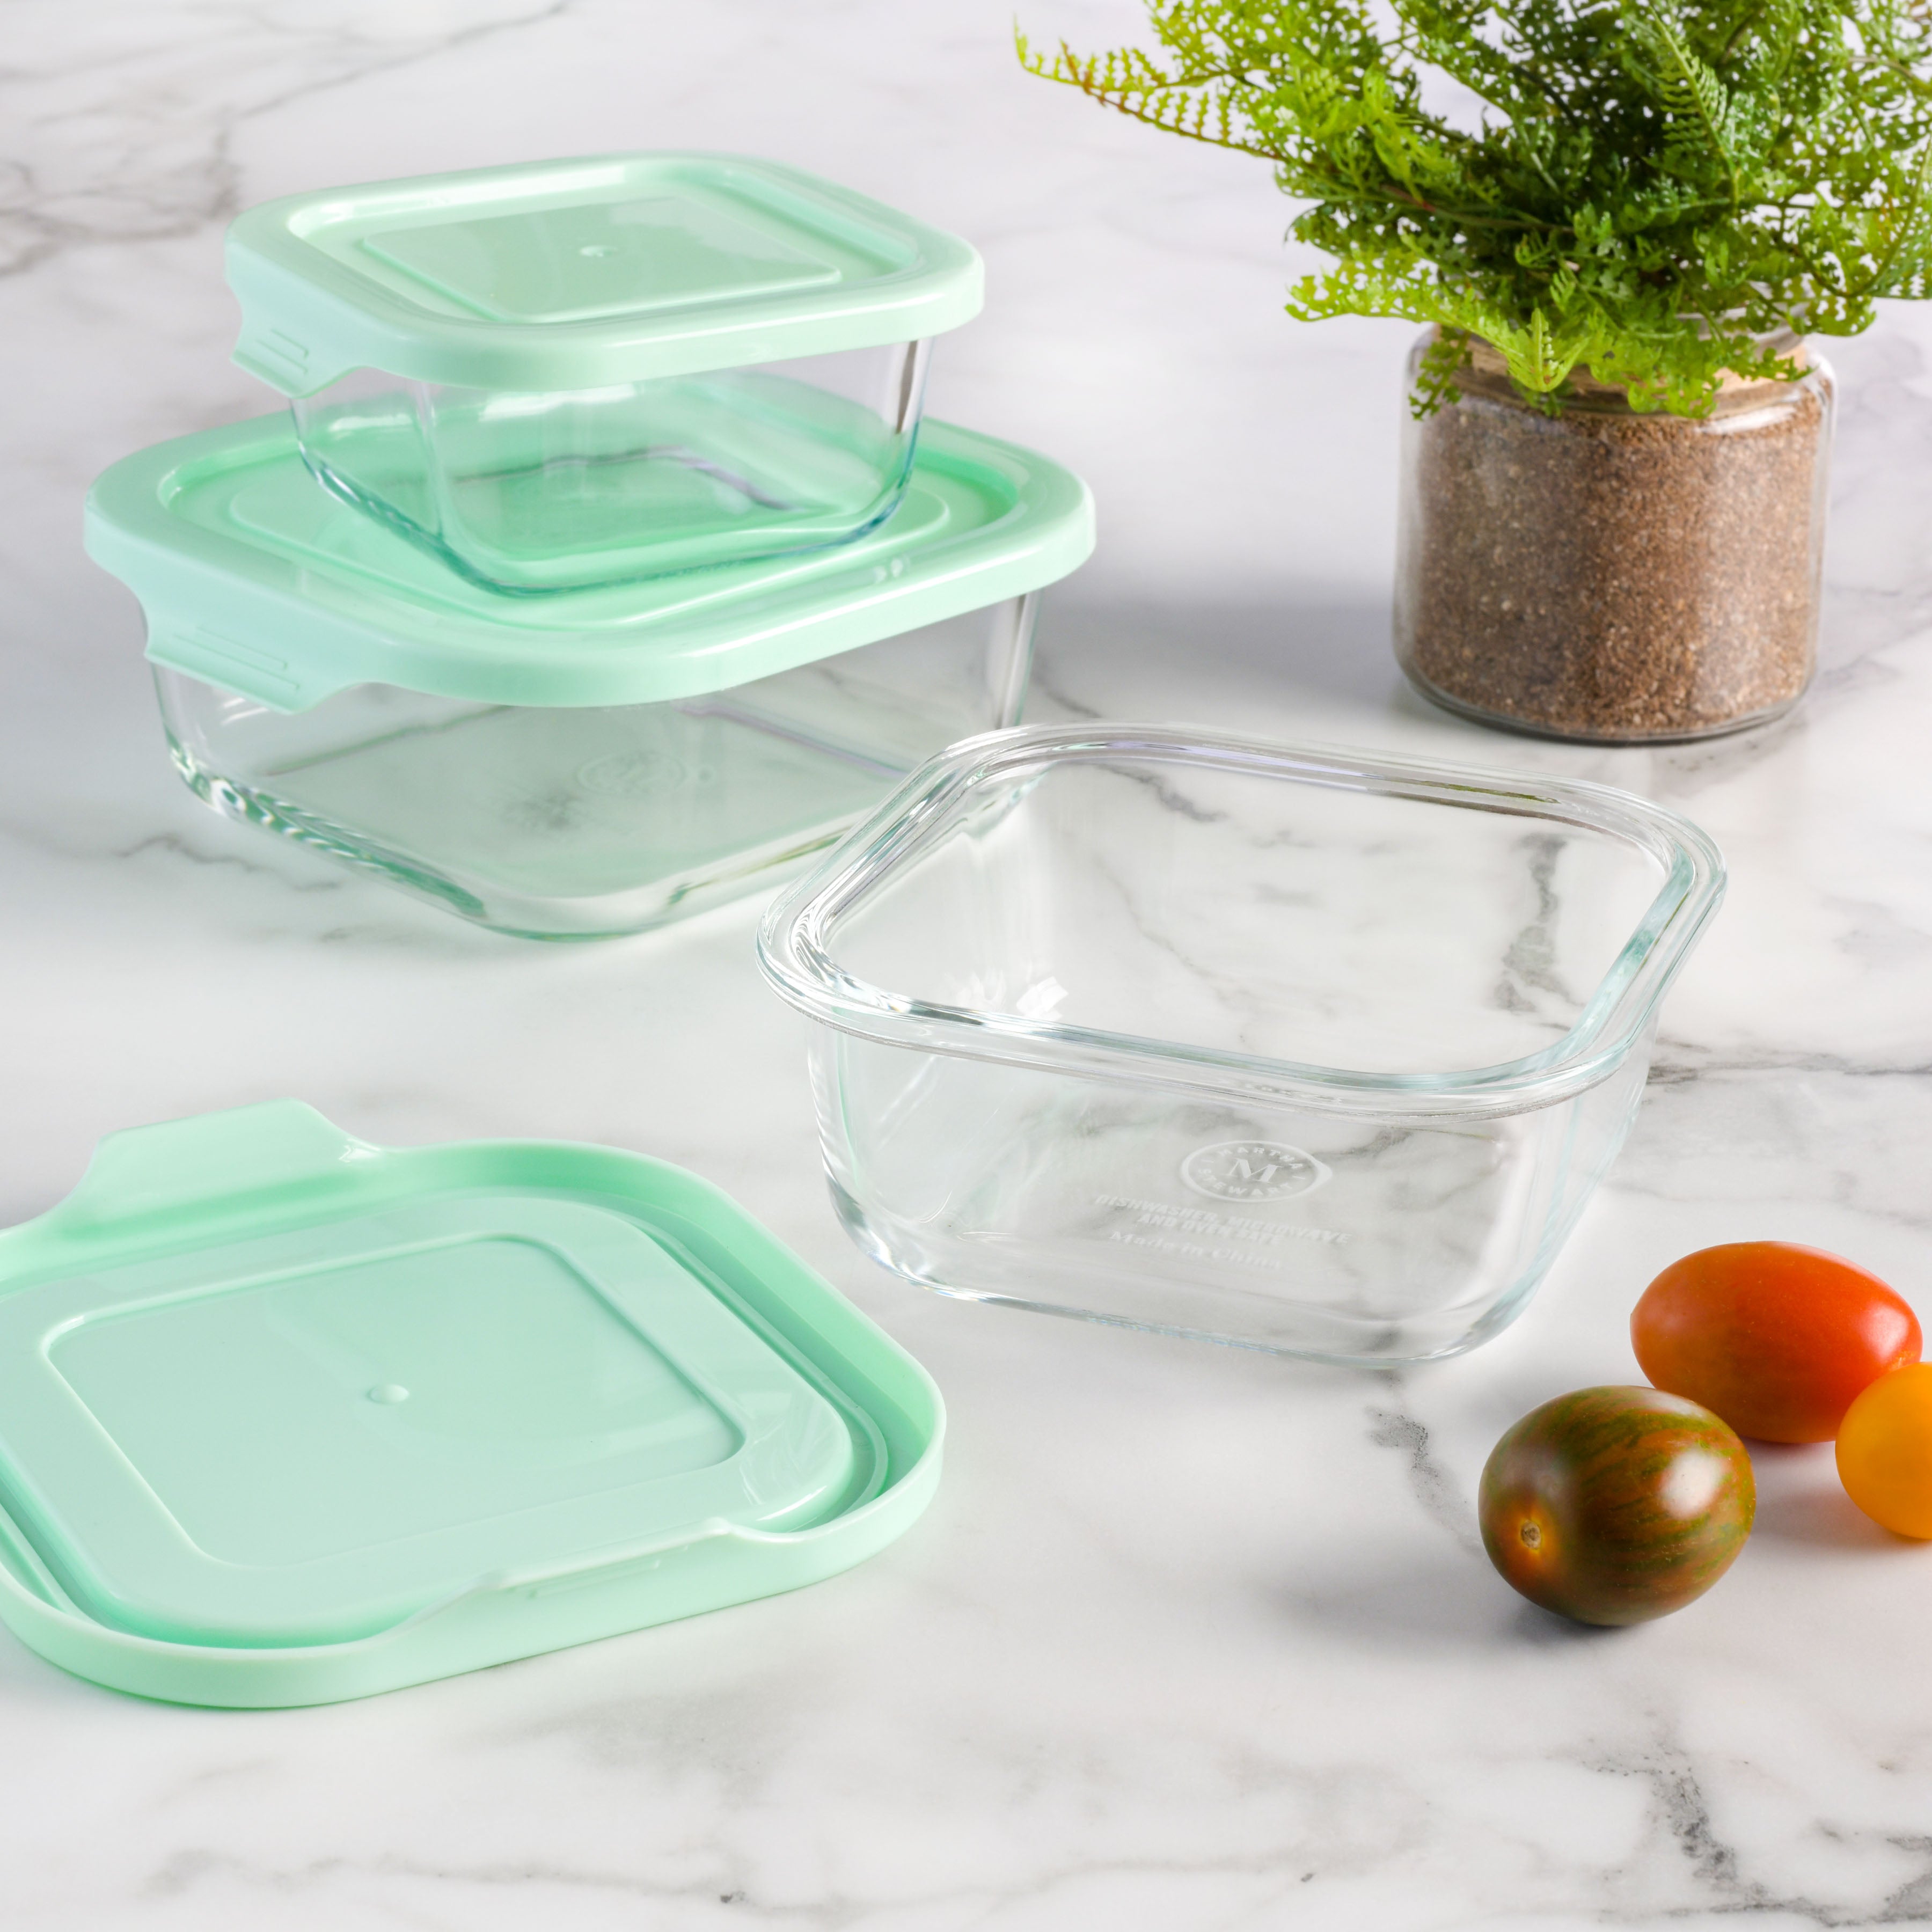 Pyrex Storage Containers - 6 pieces